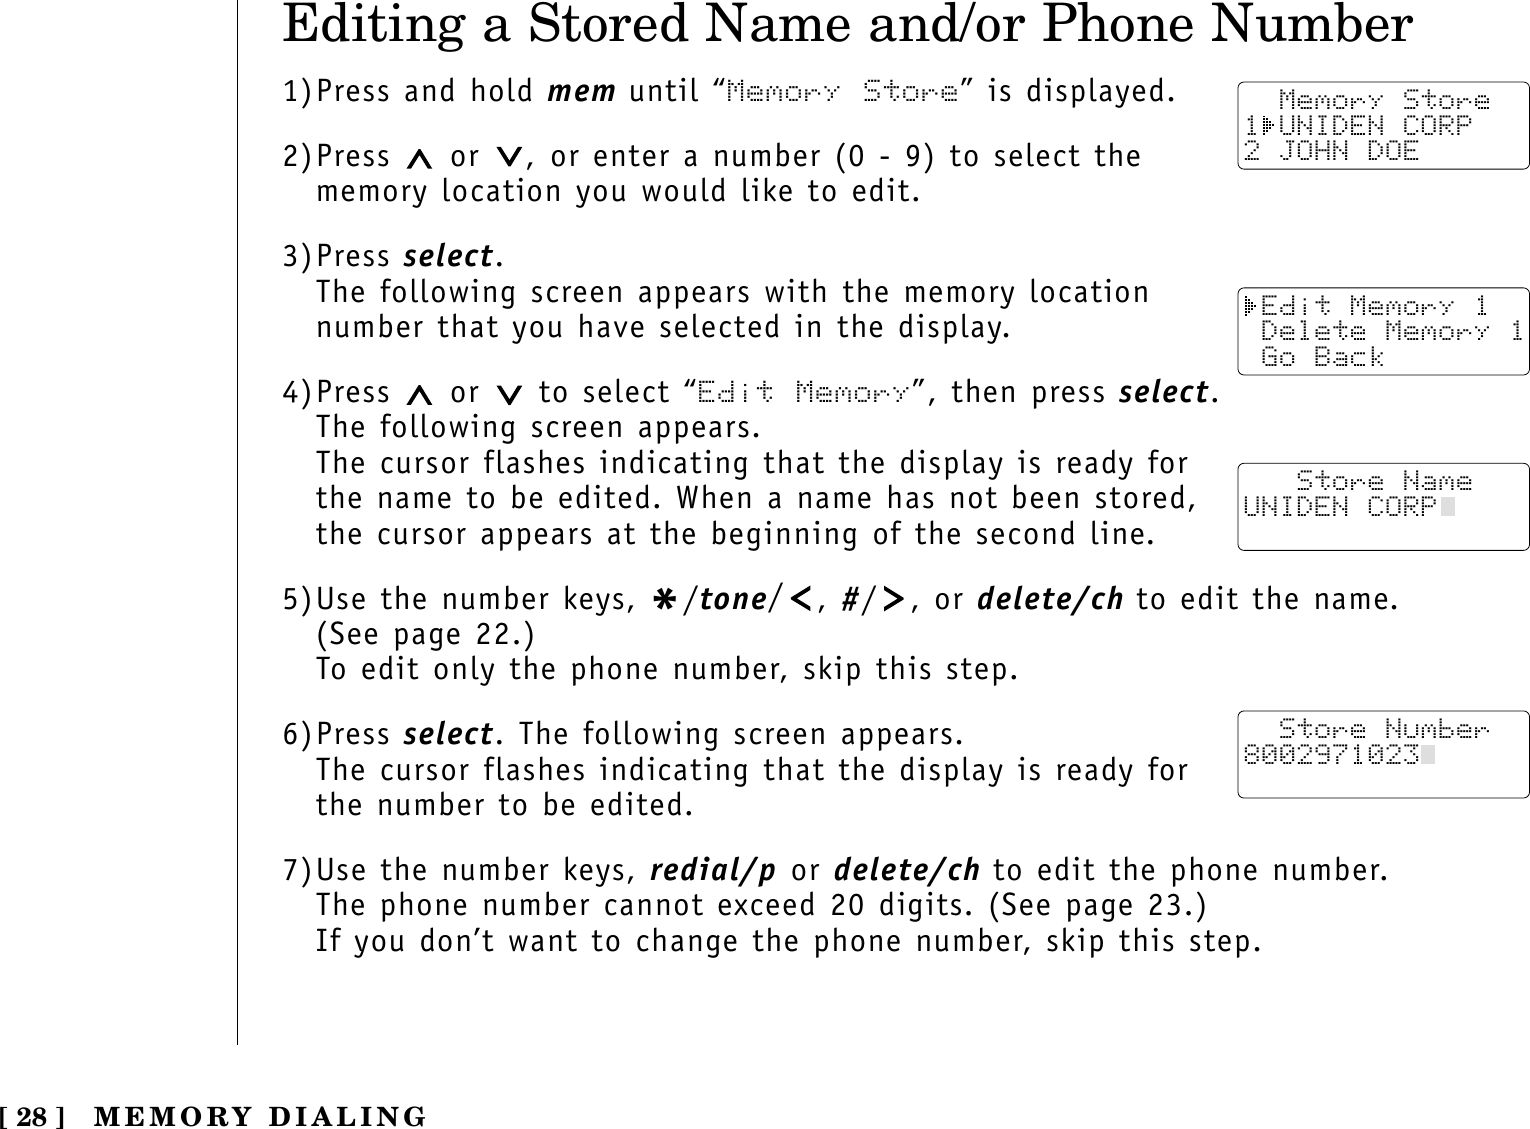 [ 28 ]Editing a Stored Name and/or Phone Number1)Press and hold mem until “Memory Store” is displayed.2)Press  or  , or enter a number (0 - 9) to select thememory location you would like to edit.3)Press select.The following screen appears with the memory location number that you have selected in the display.4)Press  or  to select “Edit Memory”, then press select.The following screen appears.The cursor flashes indicating that the display is ready forthe name to be edited. When a name has not been stored,the cursor appears at the beginning of the second line.5)Use the number keys, */tone/, #/ , or delete/ch to edit the name. (See page 22.)To edit only the phone number, skip this step.6)Press select. The following screen appears.The cursor flashes indicating that the display is ready forthe number to be edited.7)Use the number keys, redial/p or delete/ch to edit the phone number. The phone number cannot exceed 20 digits. (See page 23.)If you don’t want to change the phone number, skip this step.  Memory Store1 UNIDEN CORP2 JOHN DOE Edit Memory 1 Delete Memory 1 Go Back   Store NameUNIDEN CORP  Store Number8002971023  MEMORY DIALING